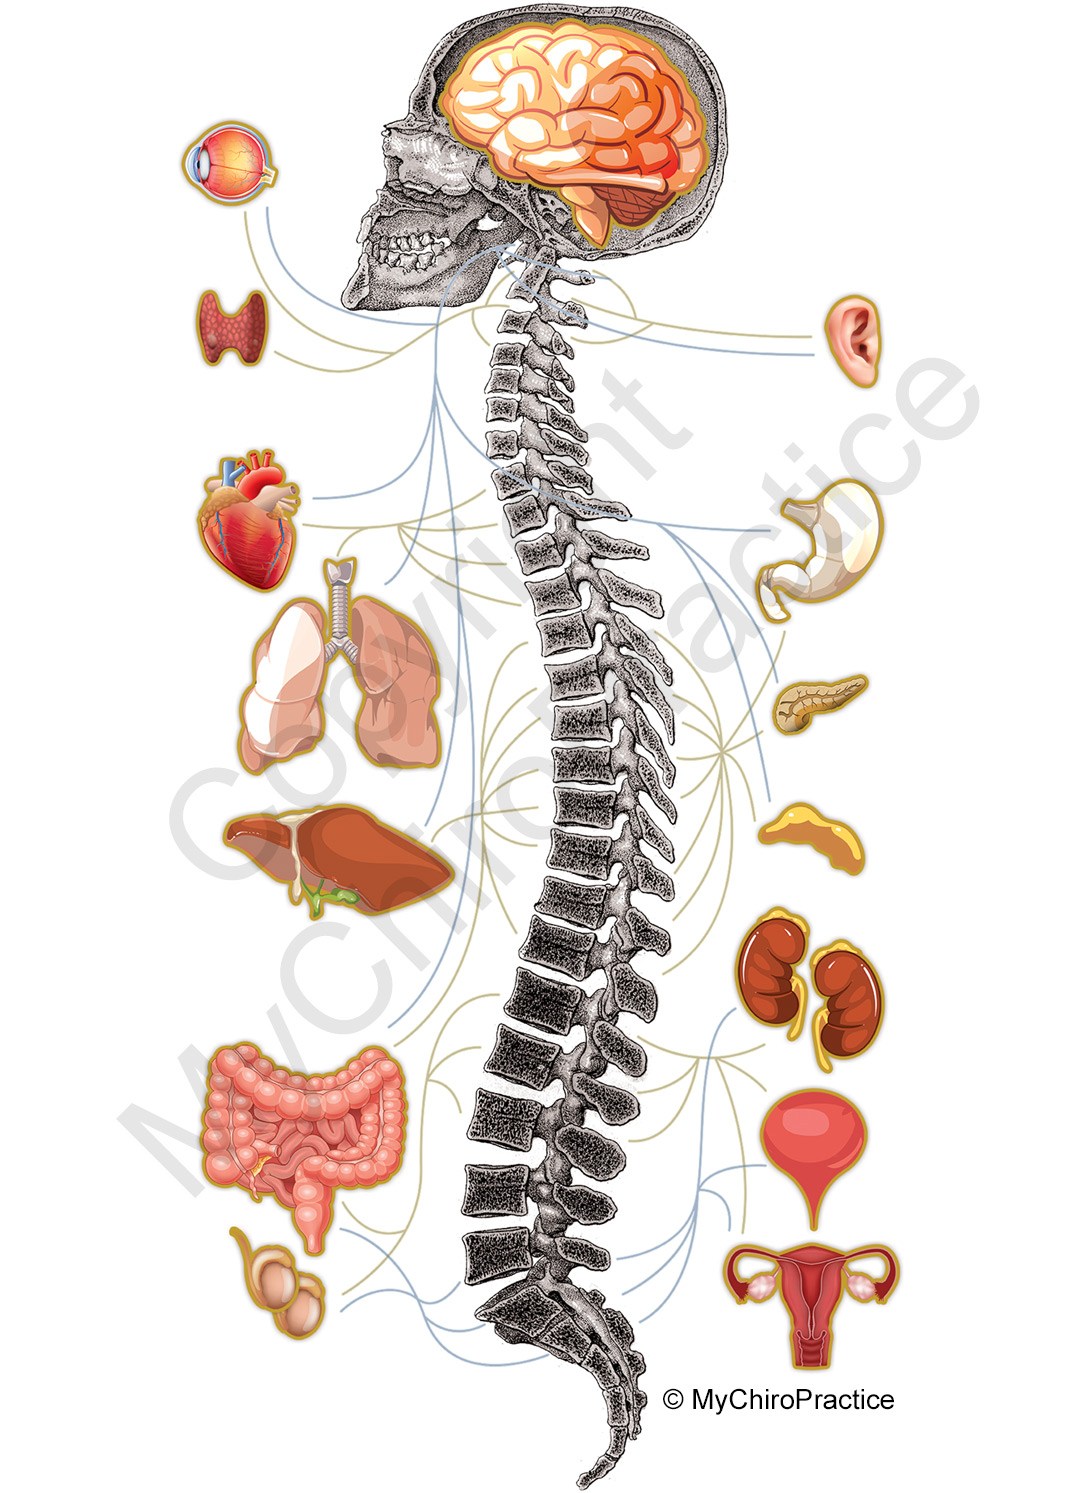 MyChiroPractice Nerve, Spine, and Organ Chart